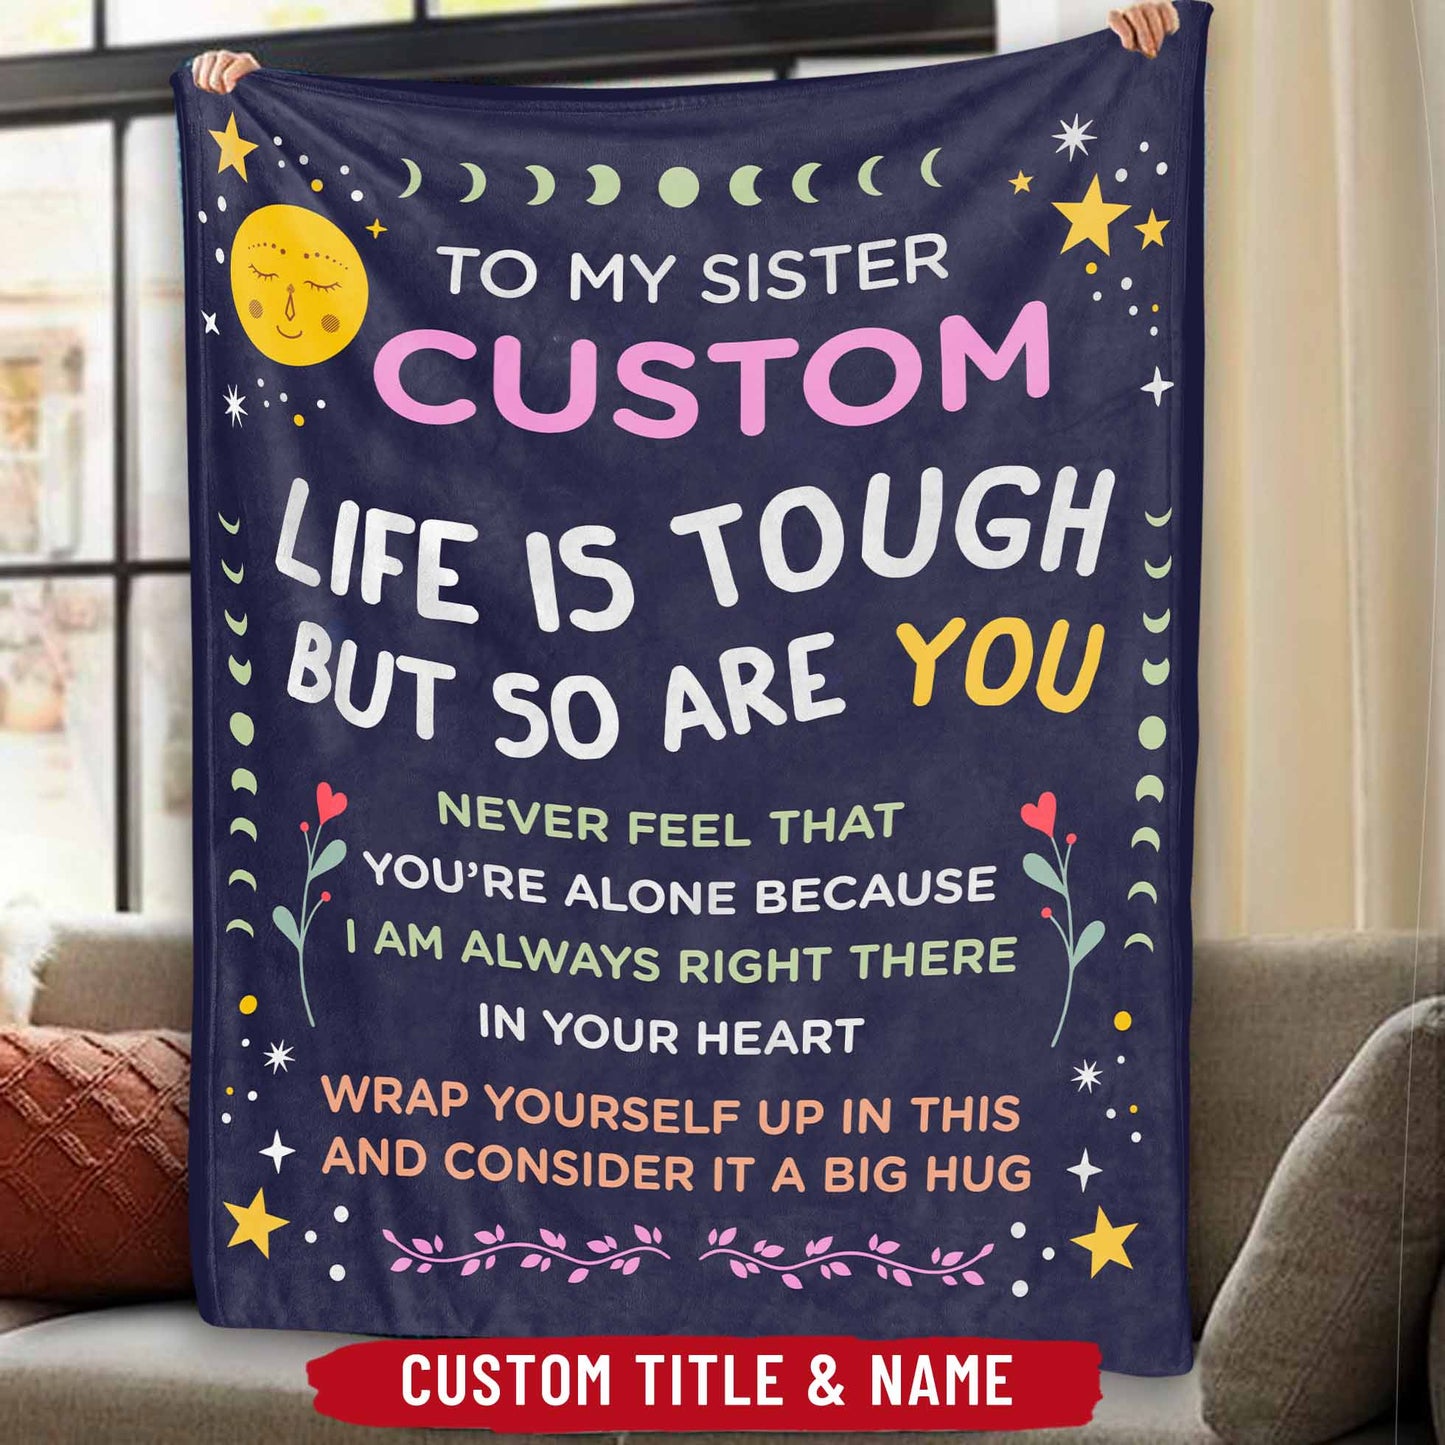 Life Is Tough So Are You Custom Blanket For Sister Daughter Bestie